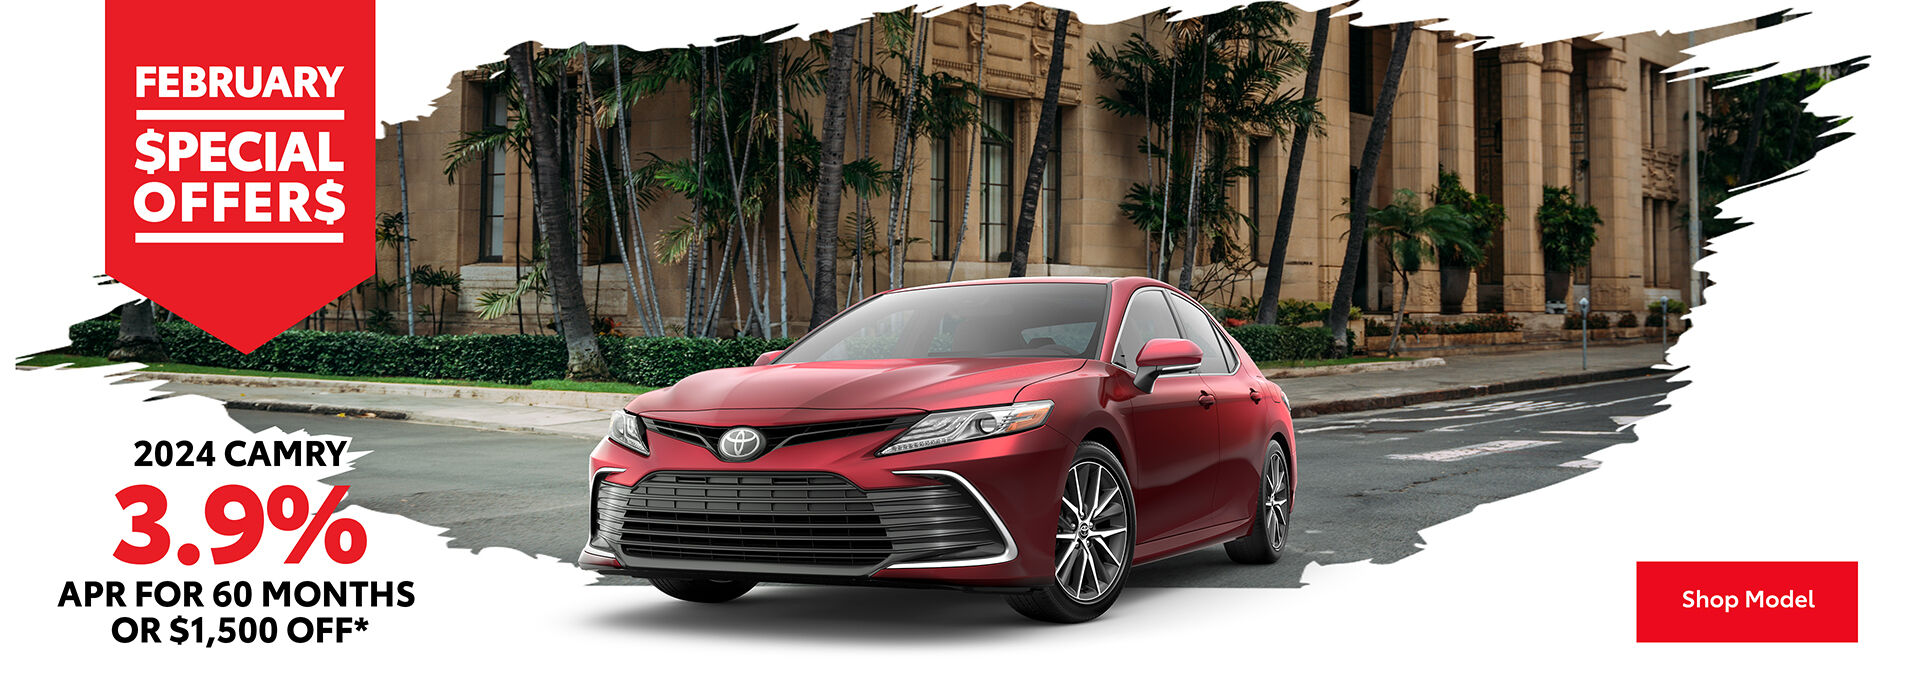 February Specials - 3.9% APR for 60 months or $1,500 off a 2024 Camry